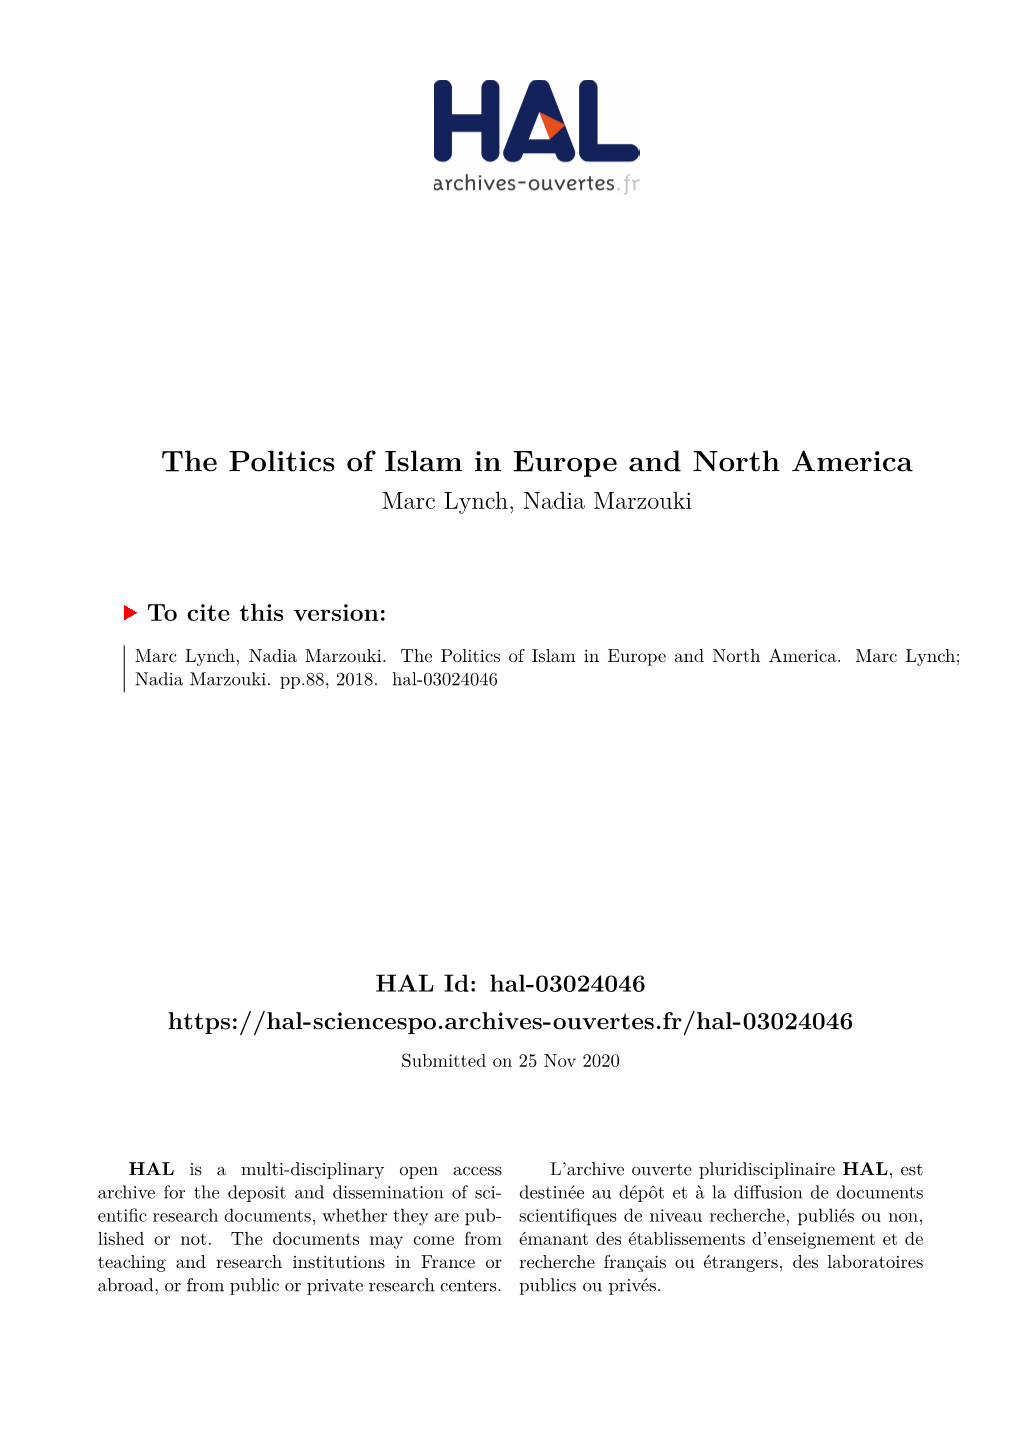 The Politics of Islam in Europe and North America Marc Lynch, Nadia Marzouki